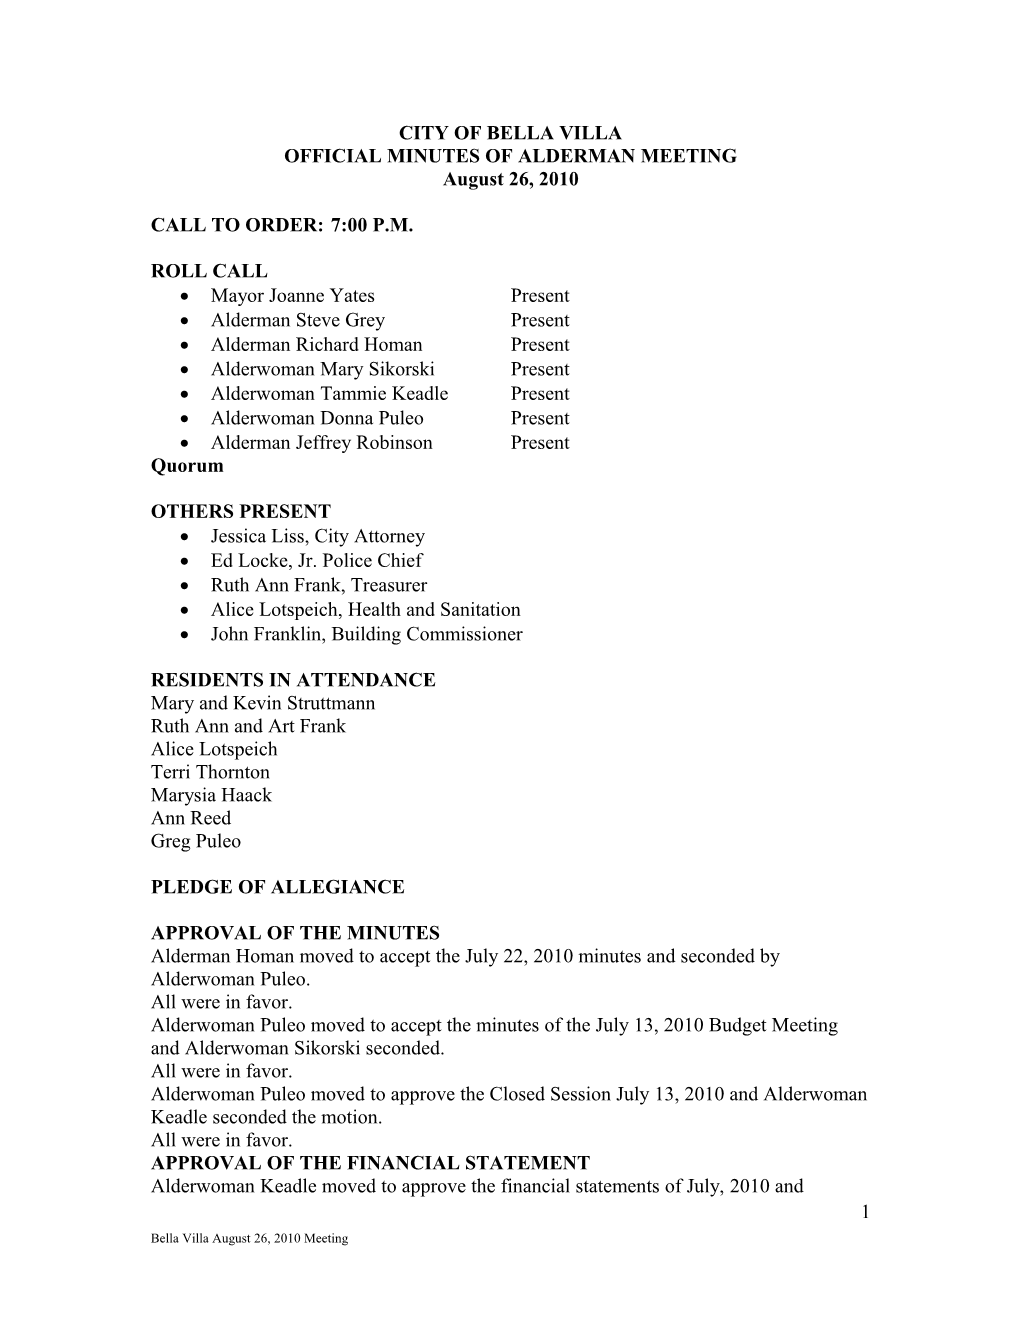 Official Minutes of Alderman Meeting